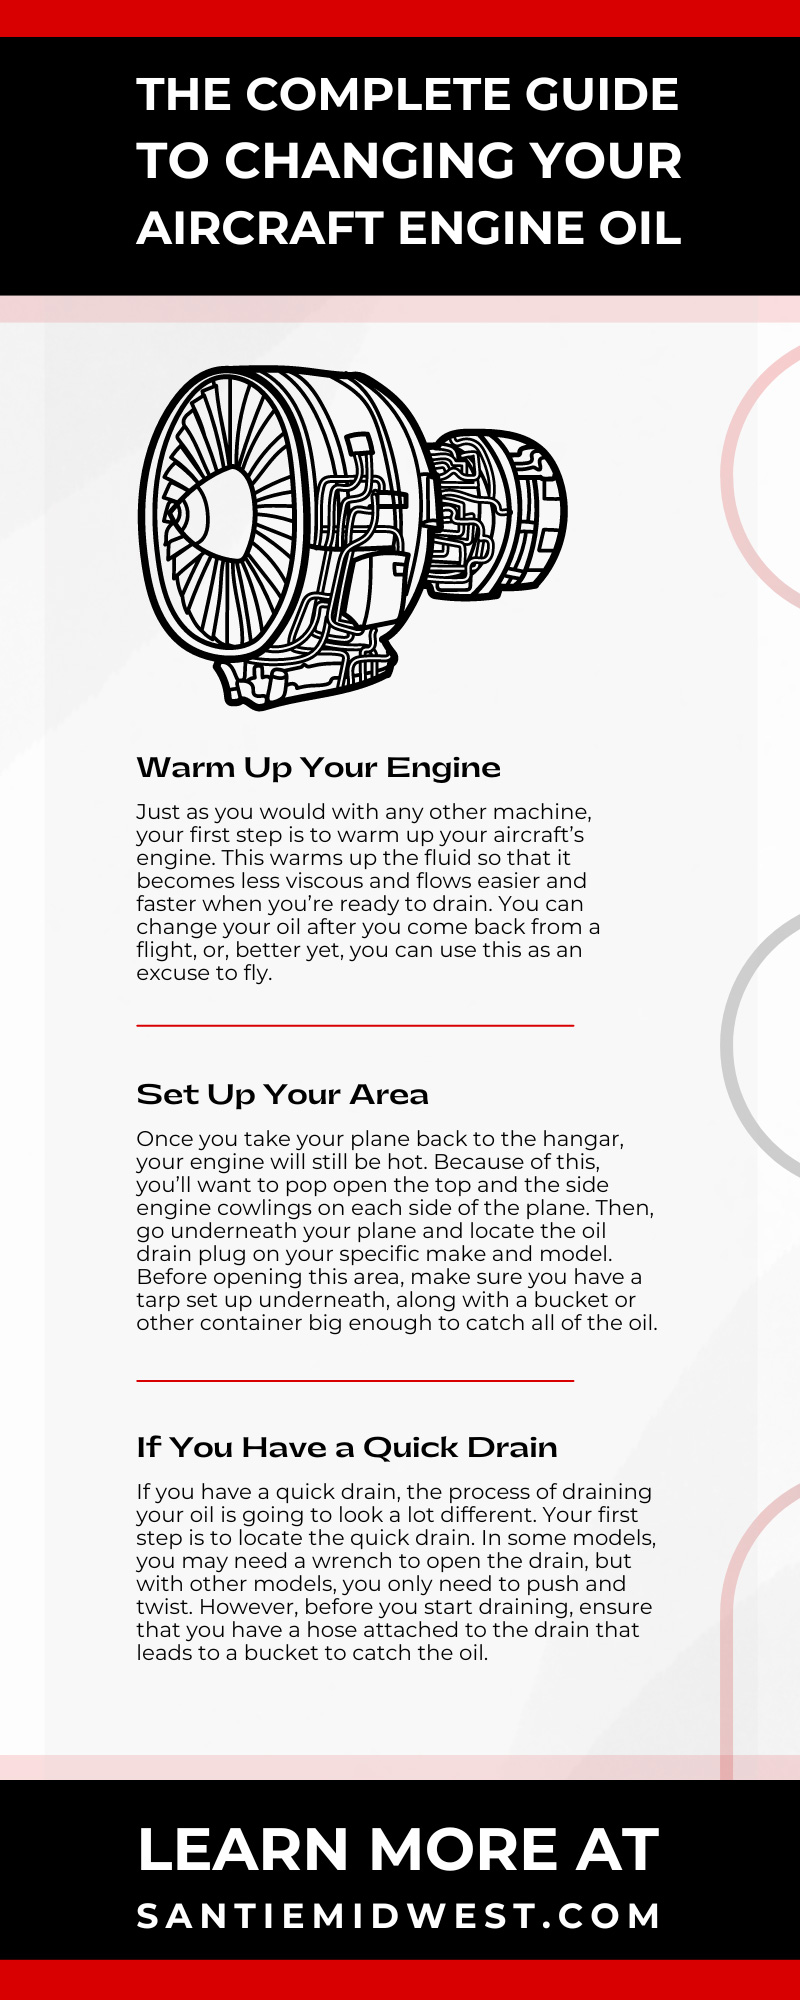 The Complete Guide to Changing Your Aircraft Engine Oil